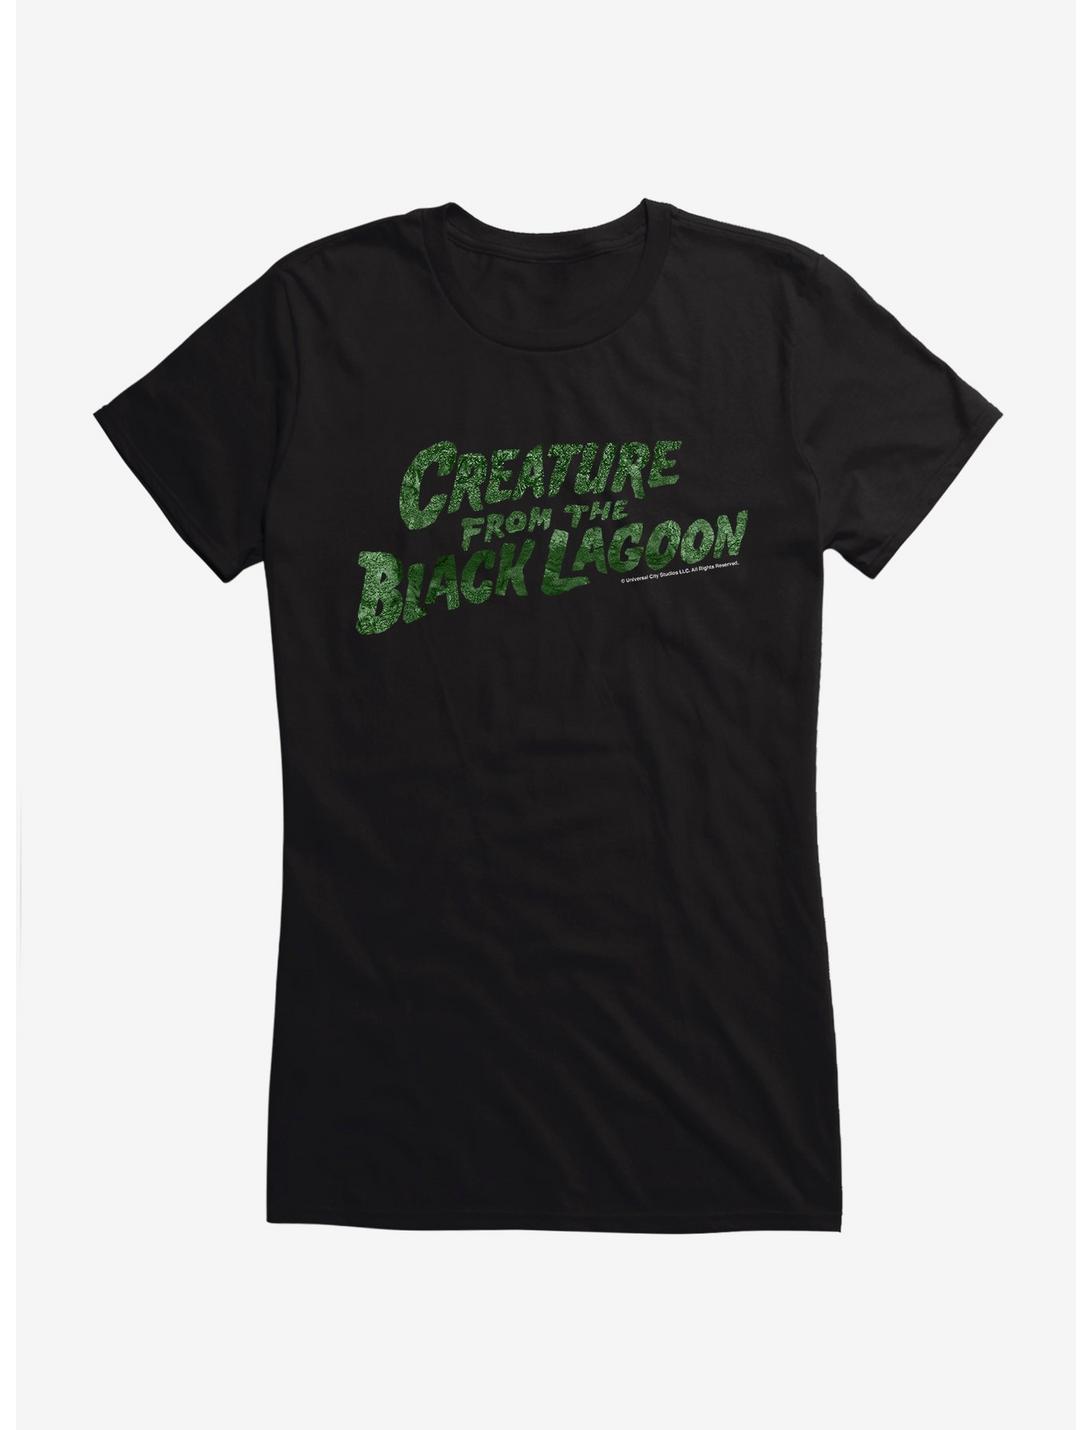 The Creature From The Black Lagoon Title Girls T-Shirt, BLACK, hi-res